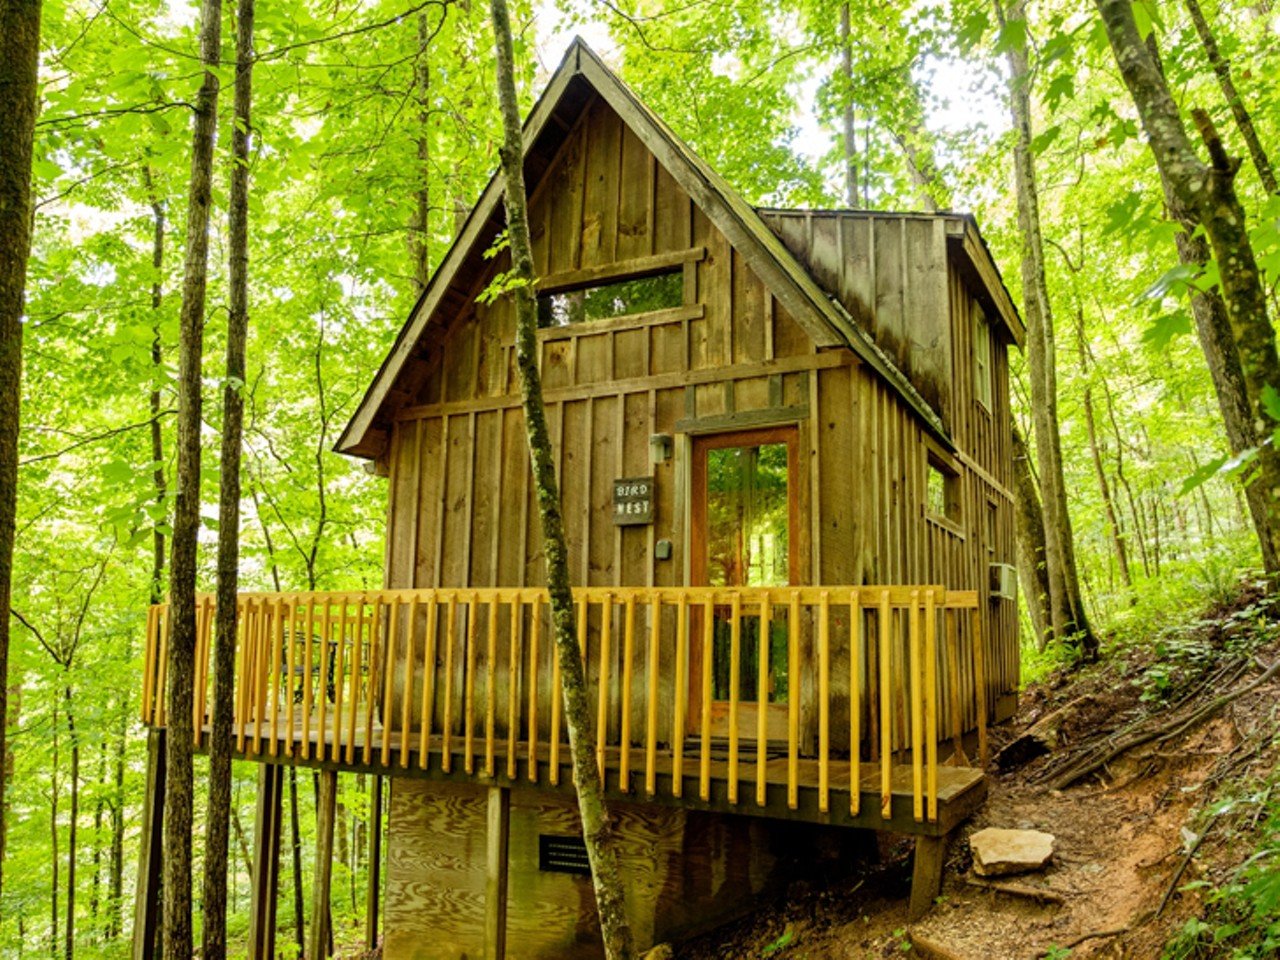 Bird Nest Cabin - Quiet Waters Cabins
Slade, Kentucky | Entire Cabin | Starting at $149/night | Hosts 2 Guests 
&#147;Enjoy an uncomplicated escape, surrounded by nature. This cabin is part of a 5 cabin complex connected by wooden walkways and staircases at Natural Bridge State Park. Take a five minute hike up to the cabin. This group of cabins is wonderful for family reunions.&#148;